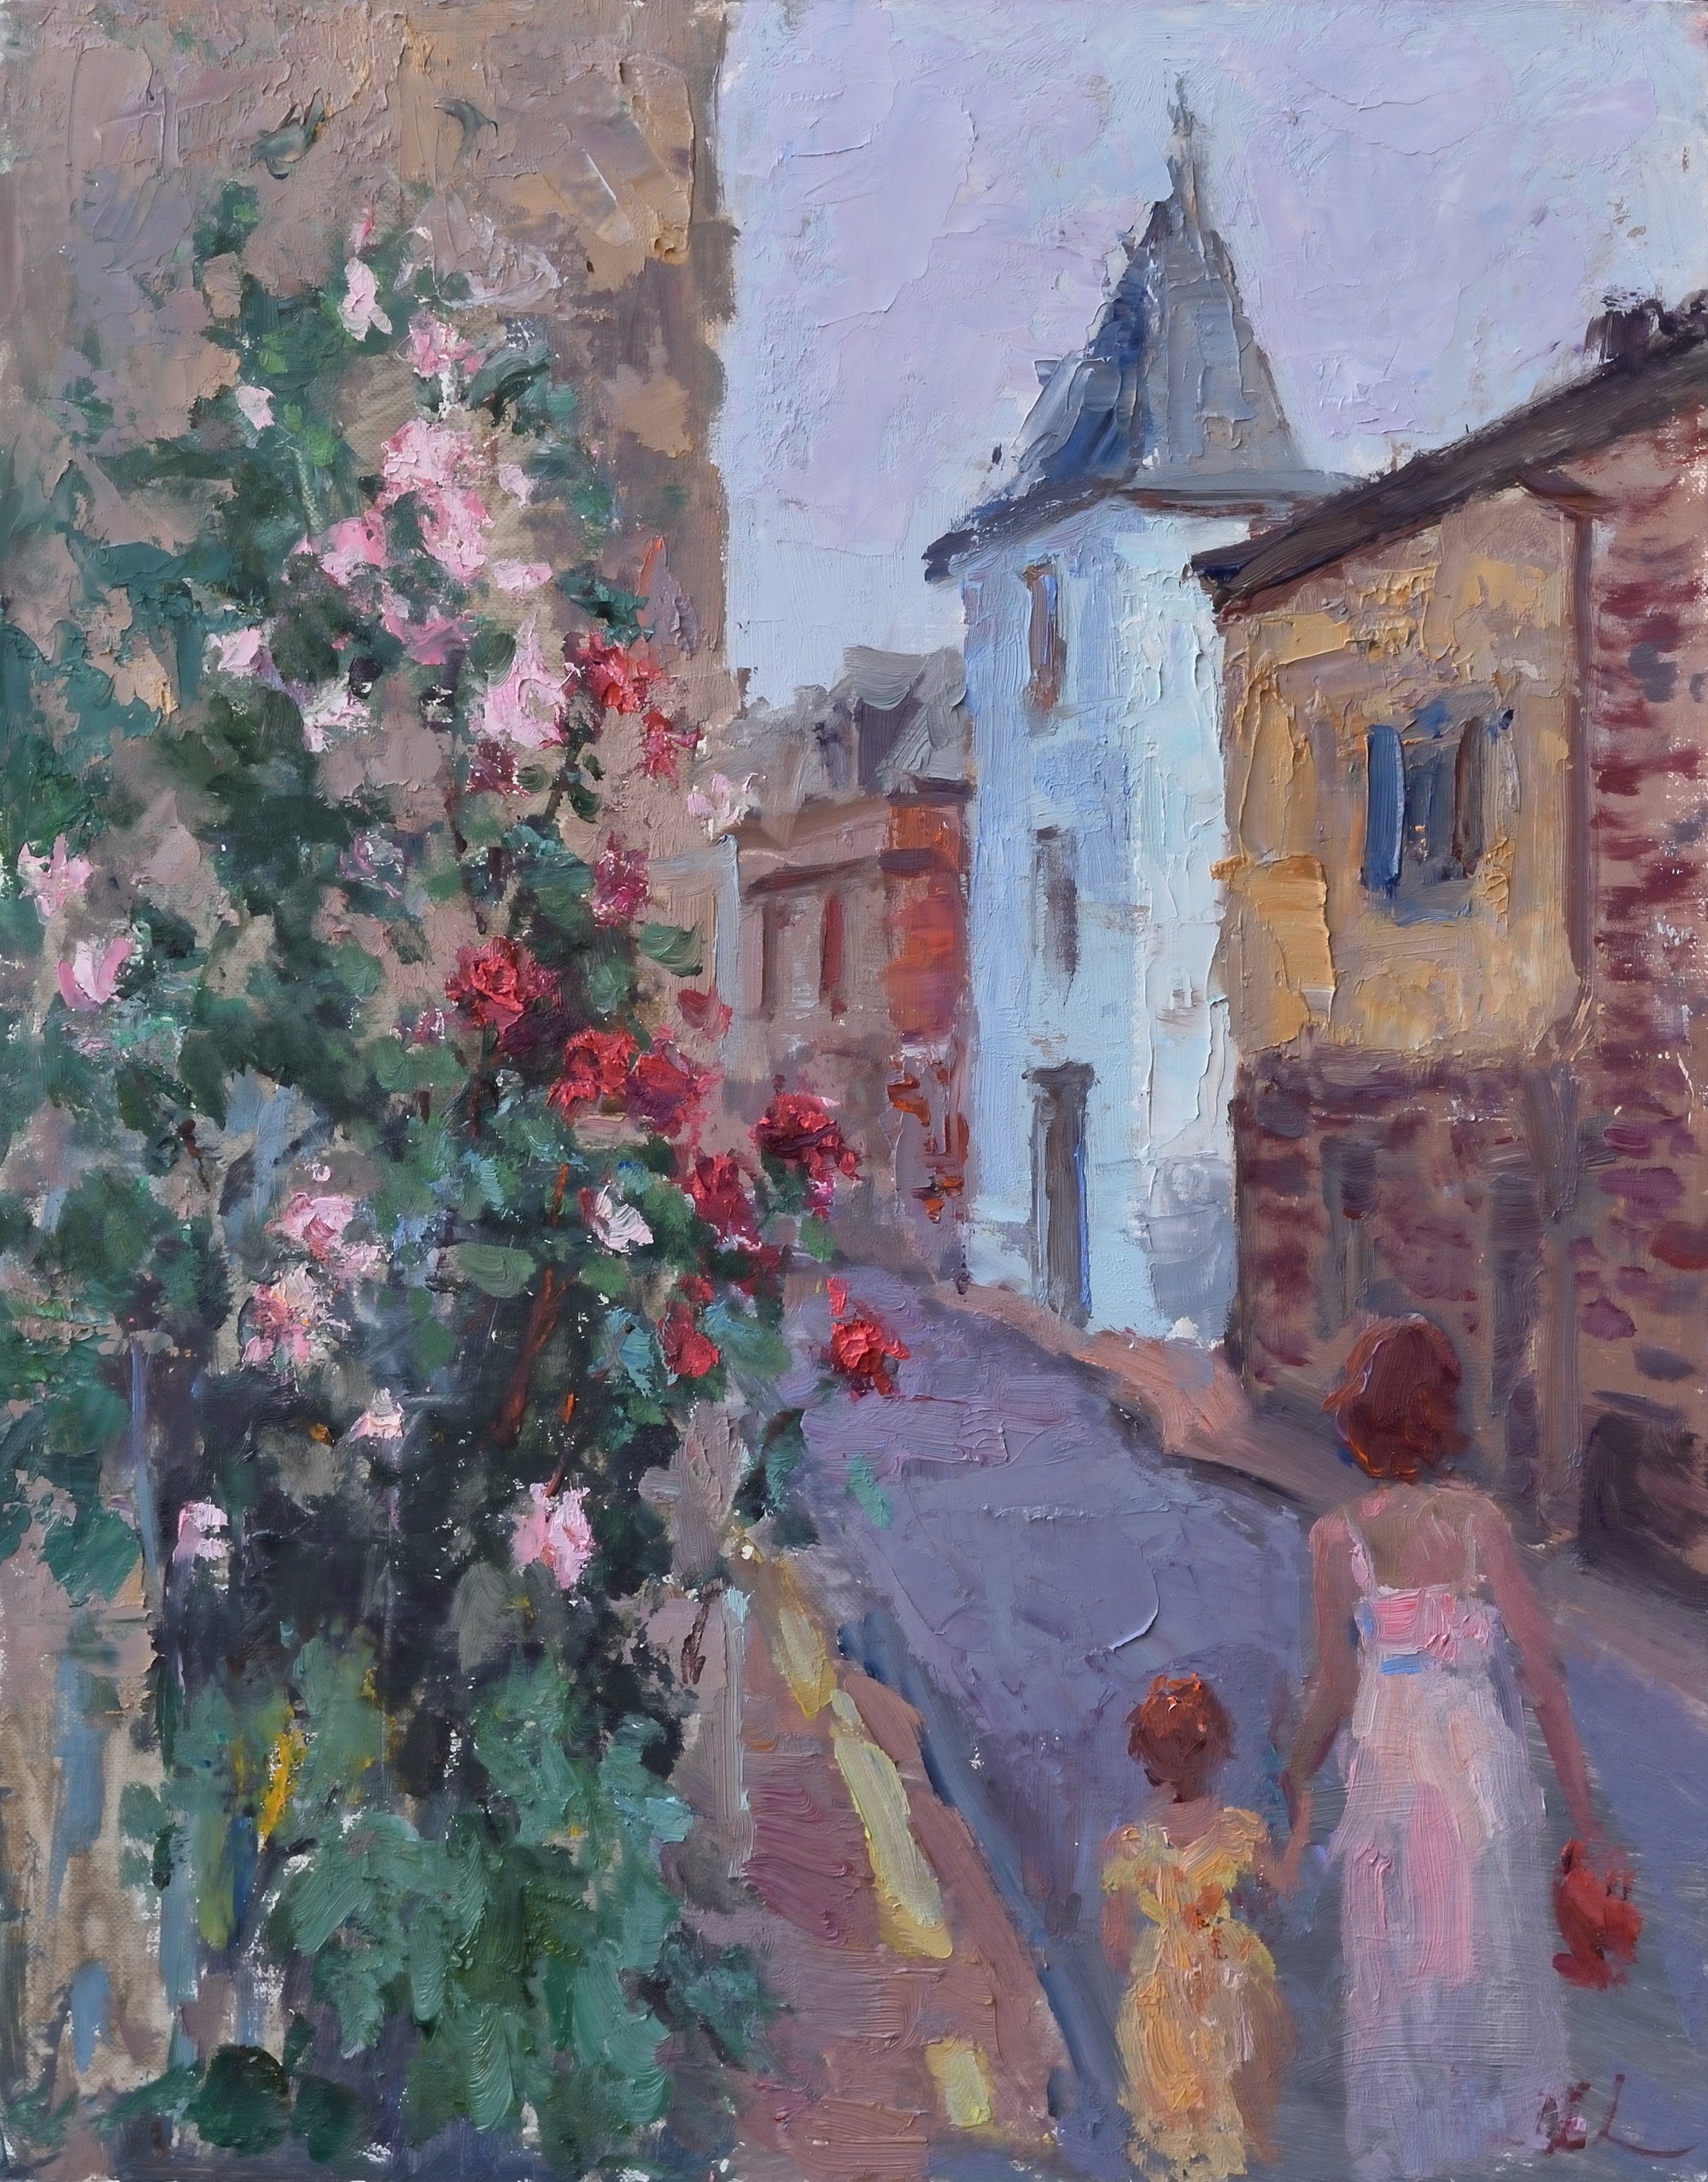 Oksana-Johnson-oil-painting-14x11-inches-Normandy-France-woman-child-walking-old-town-flowers